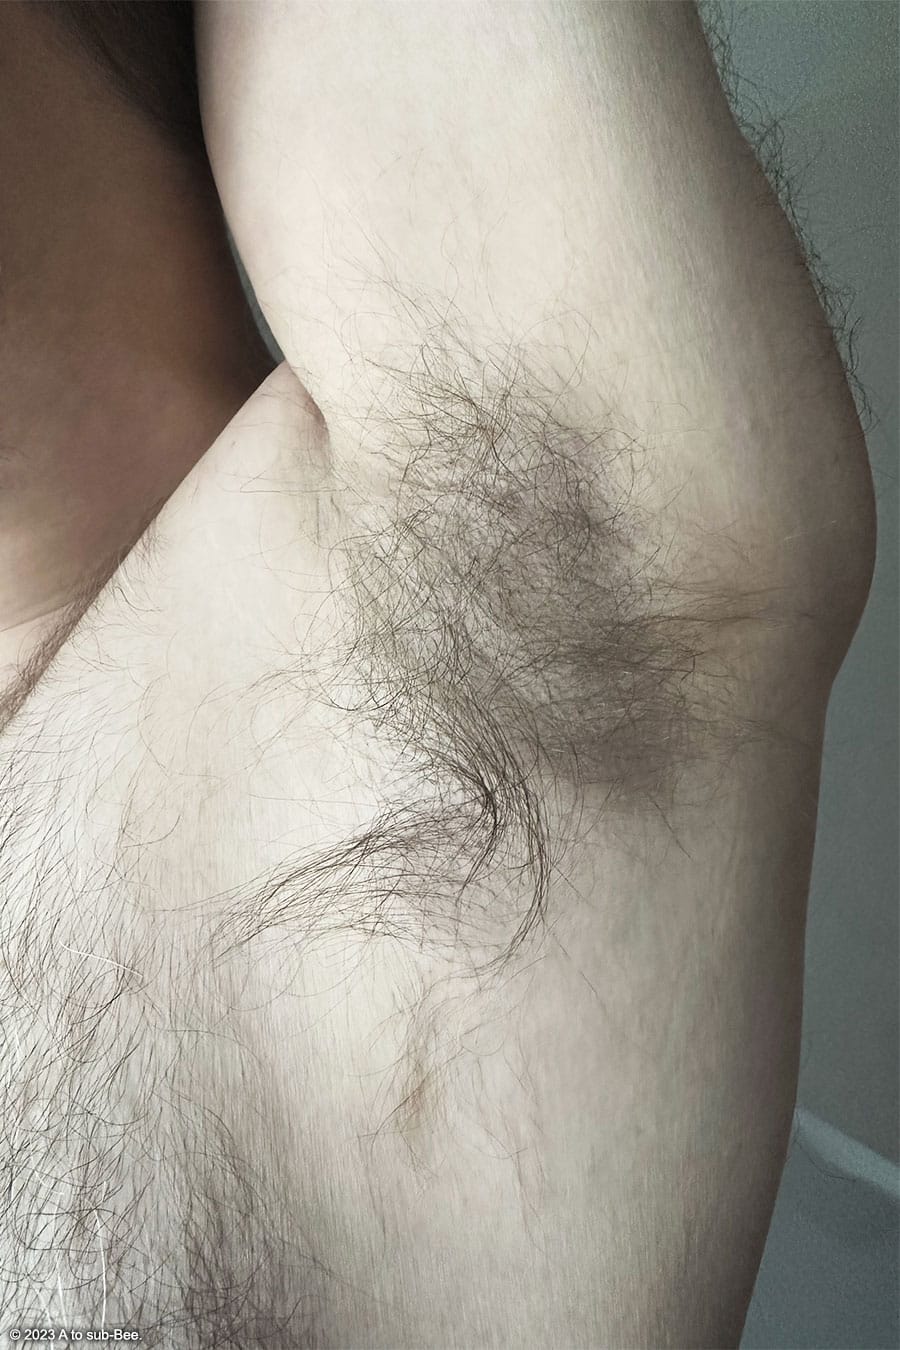 Close up of a mans hairy arm pit